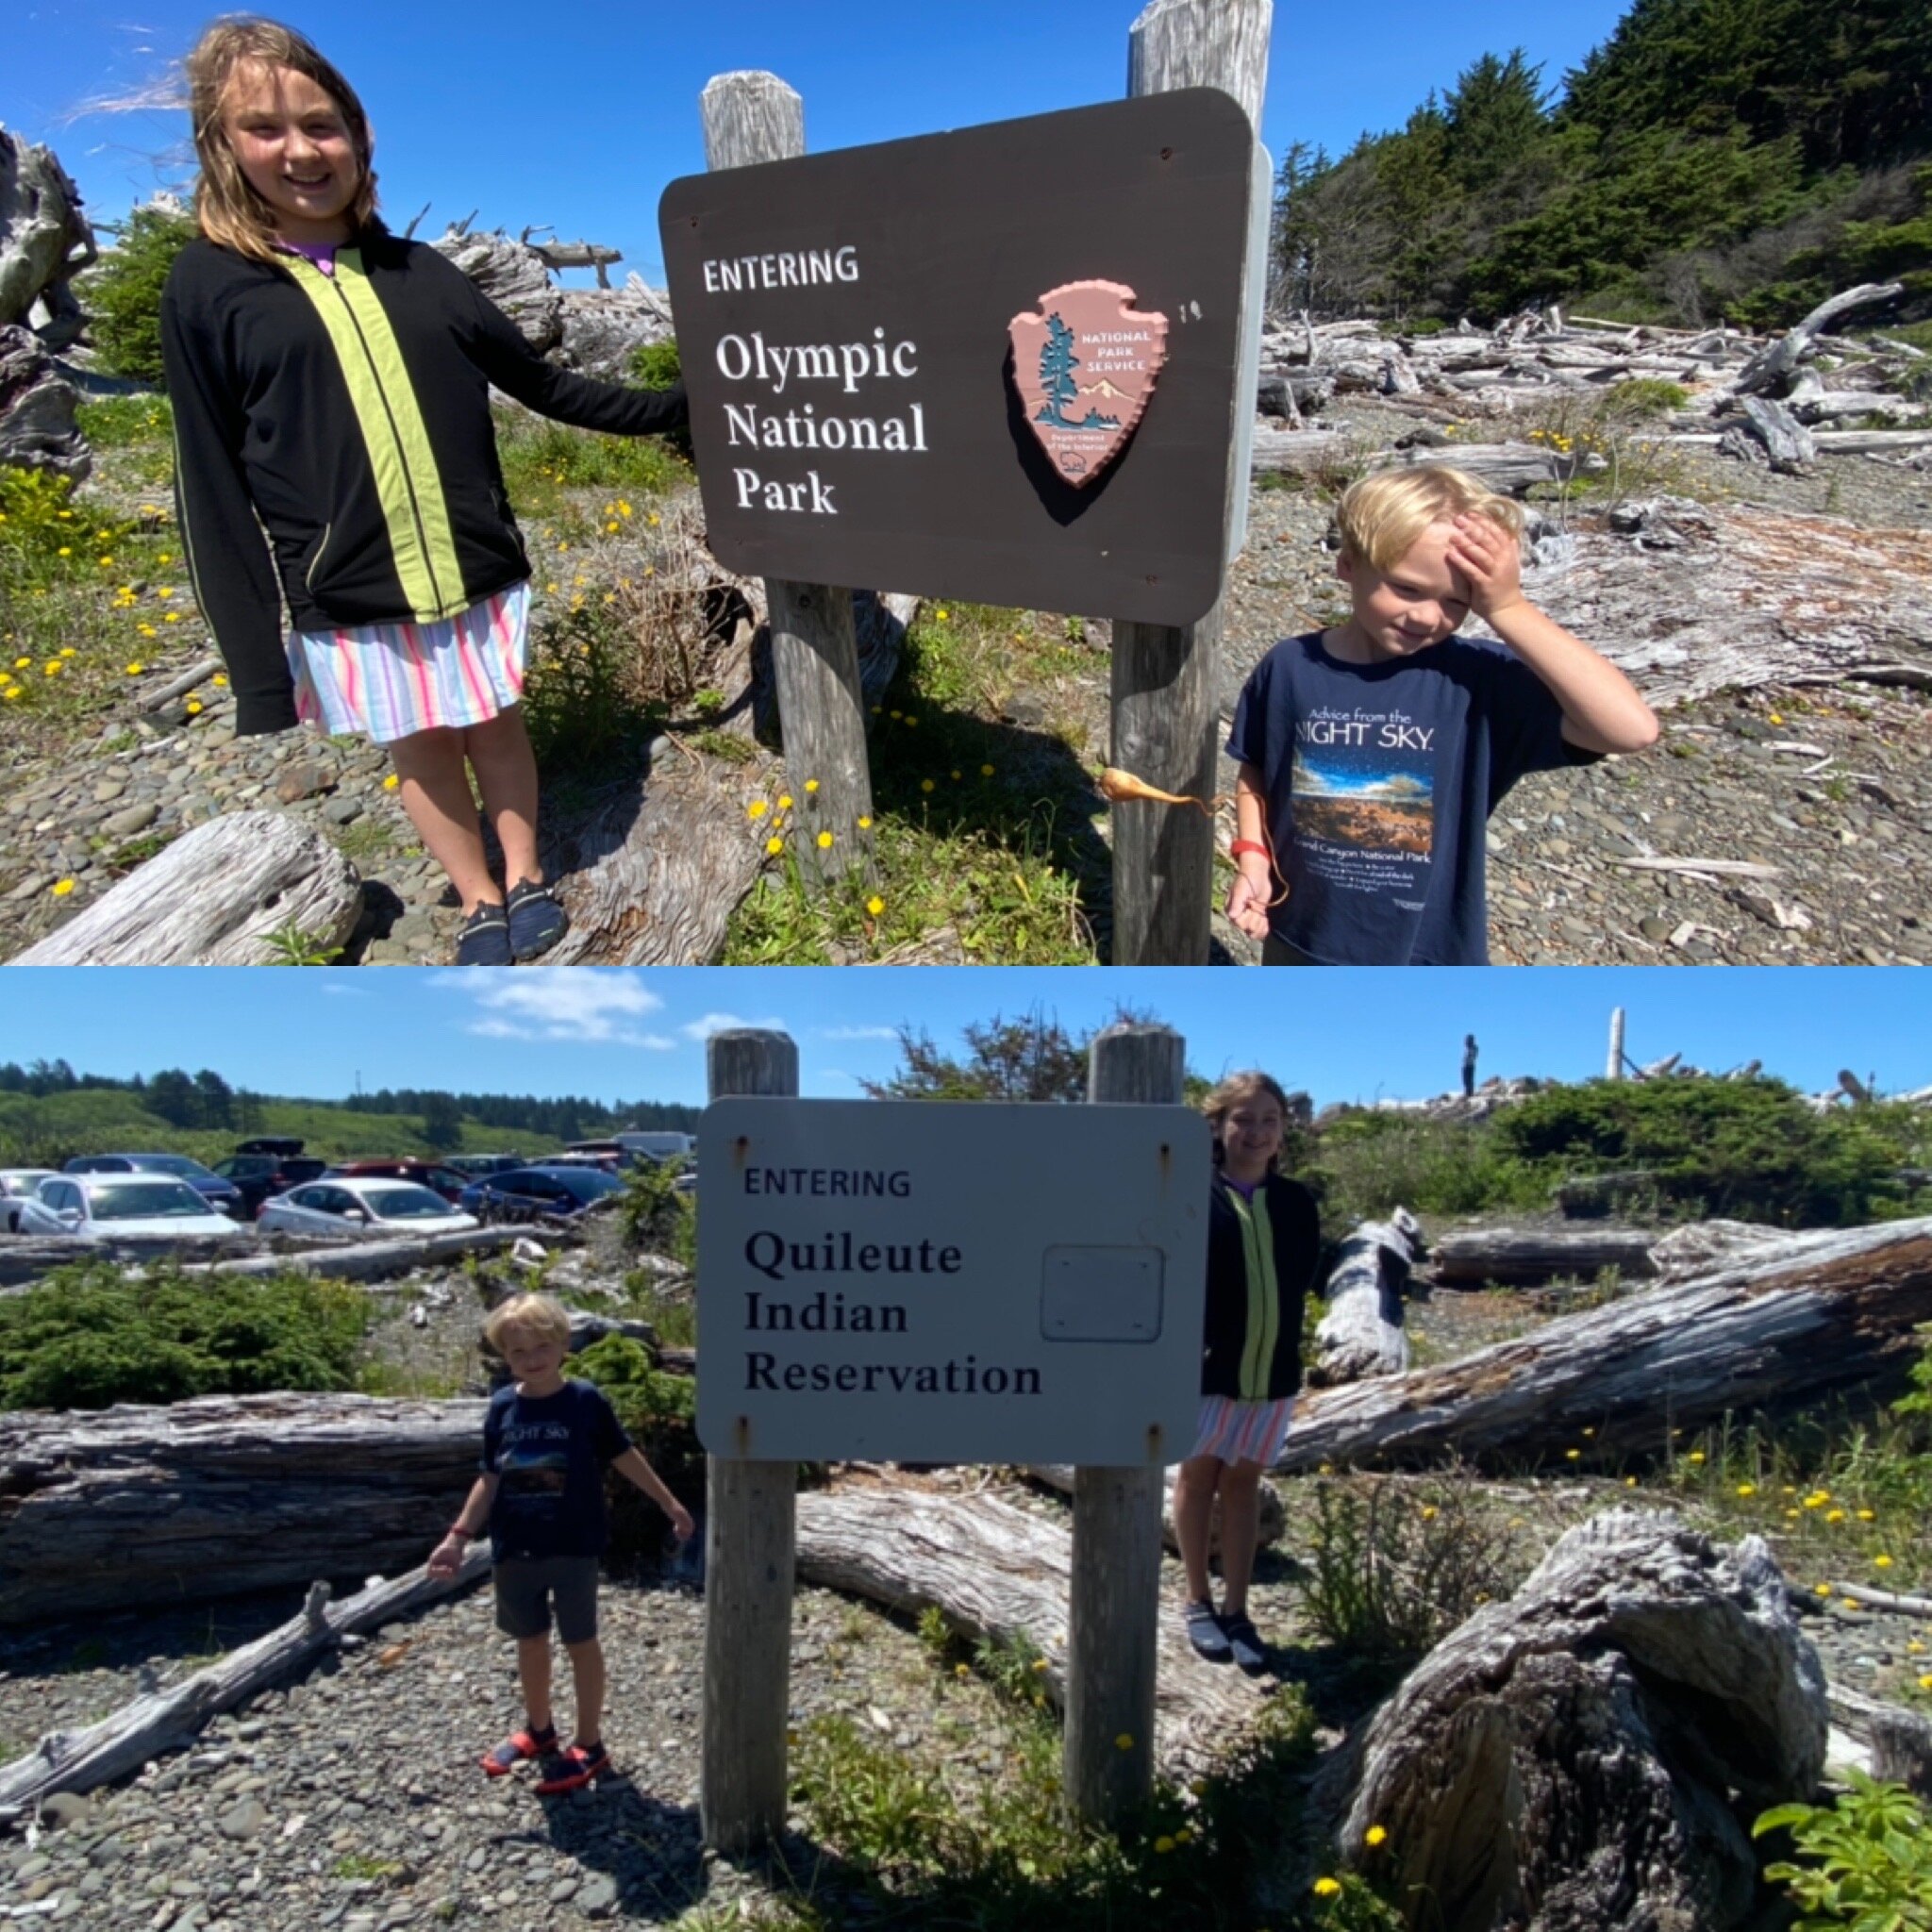 Kids taking pictures on either side of the same sign showing the border between Olympic National Park and the Quileute Indian Reservation.  Photo by Karen Boudreaux, June 17, 2021